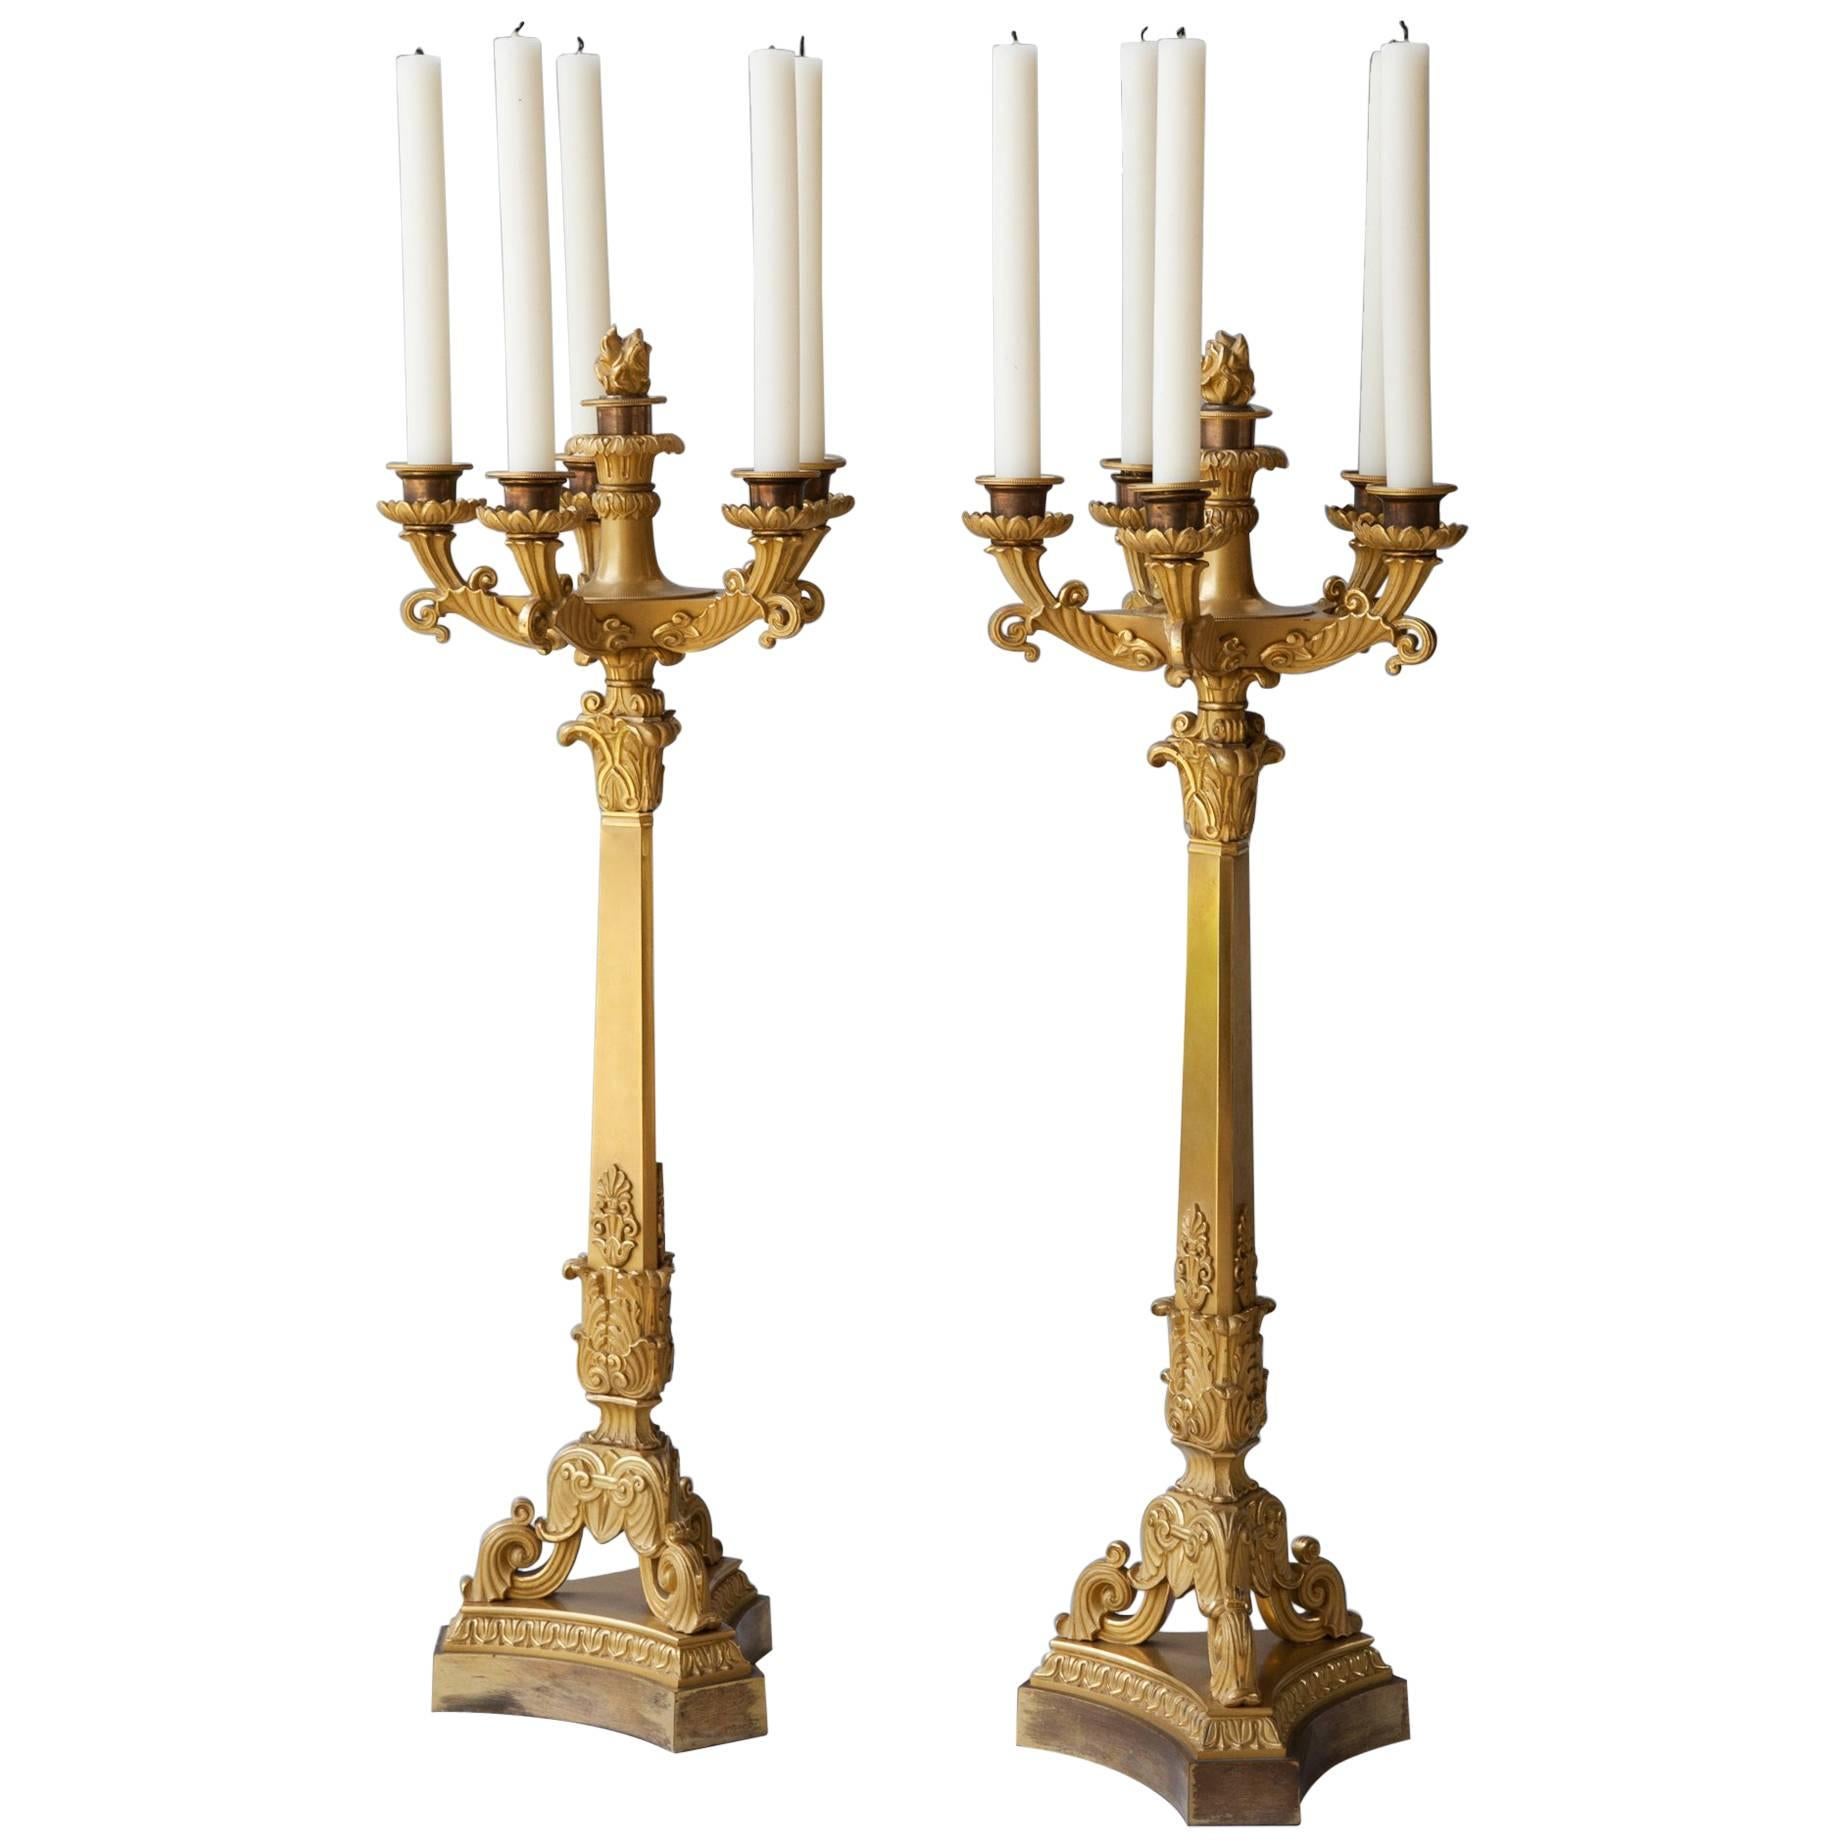 Important Pair of Early 19th Century Six-Light Ormolu Restauration Candelabra For Sale